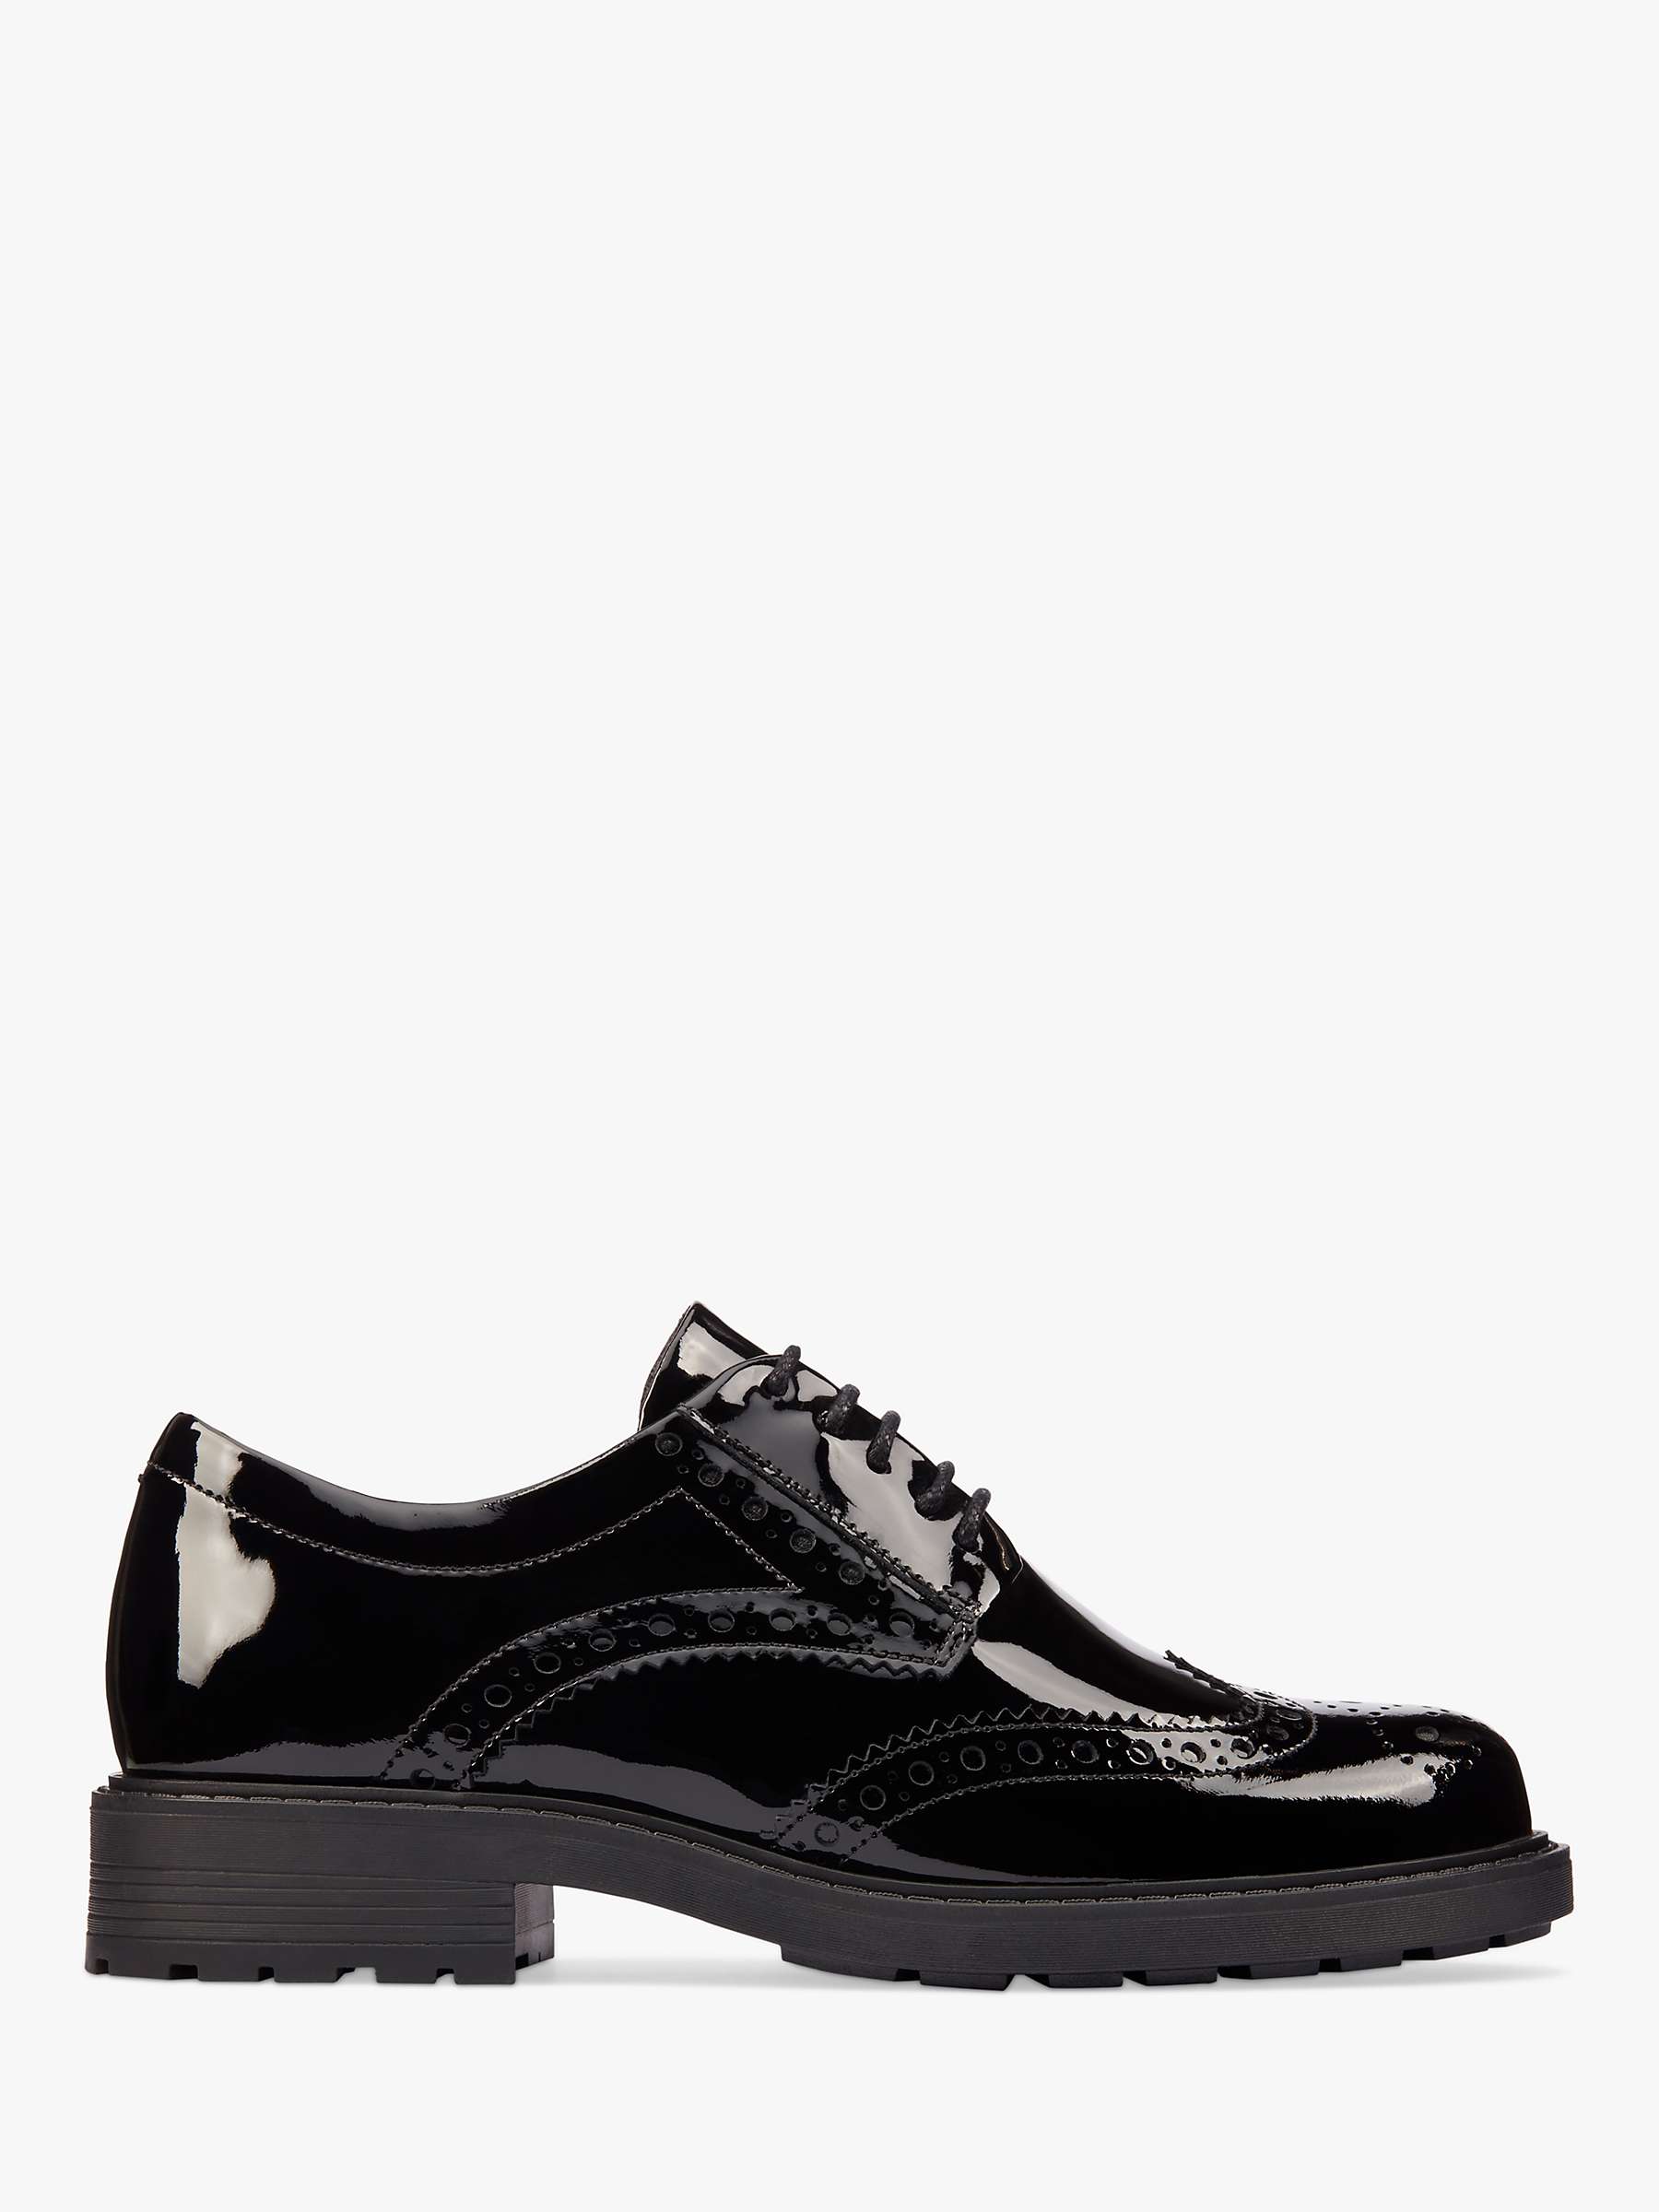 Buy Clarks Orinoco 2 Limit Patent Leather Brogues, Black Online at johnlewis.com